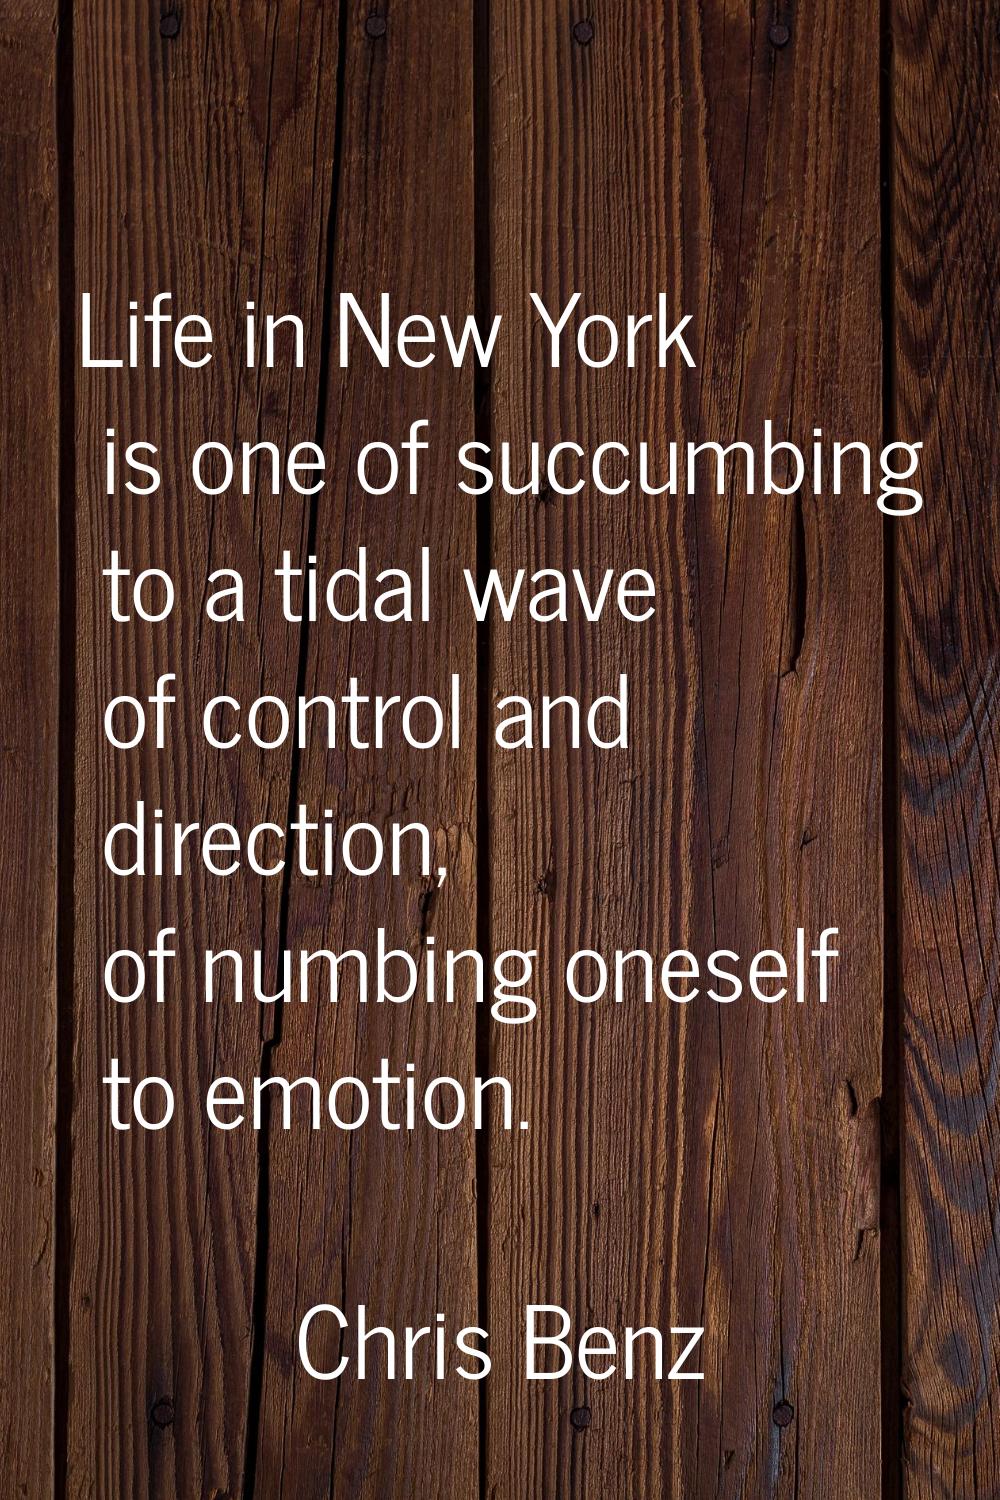 Life in New York is one of succumbing to a tidal wave of control and direction, of numbing oneself 